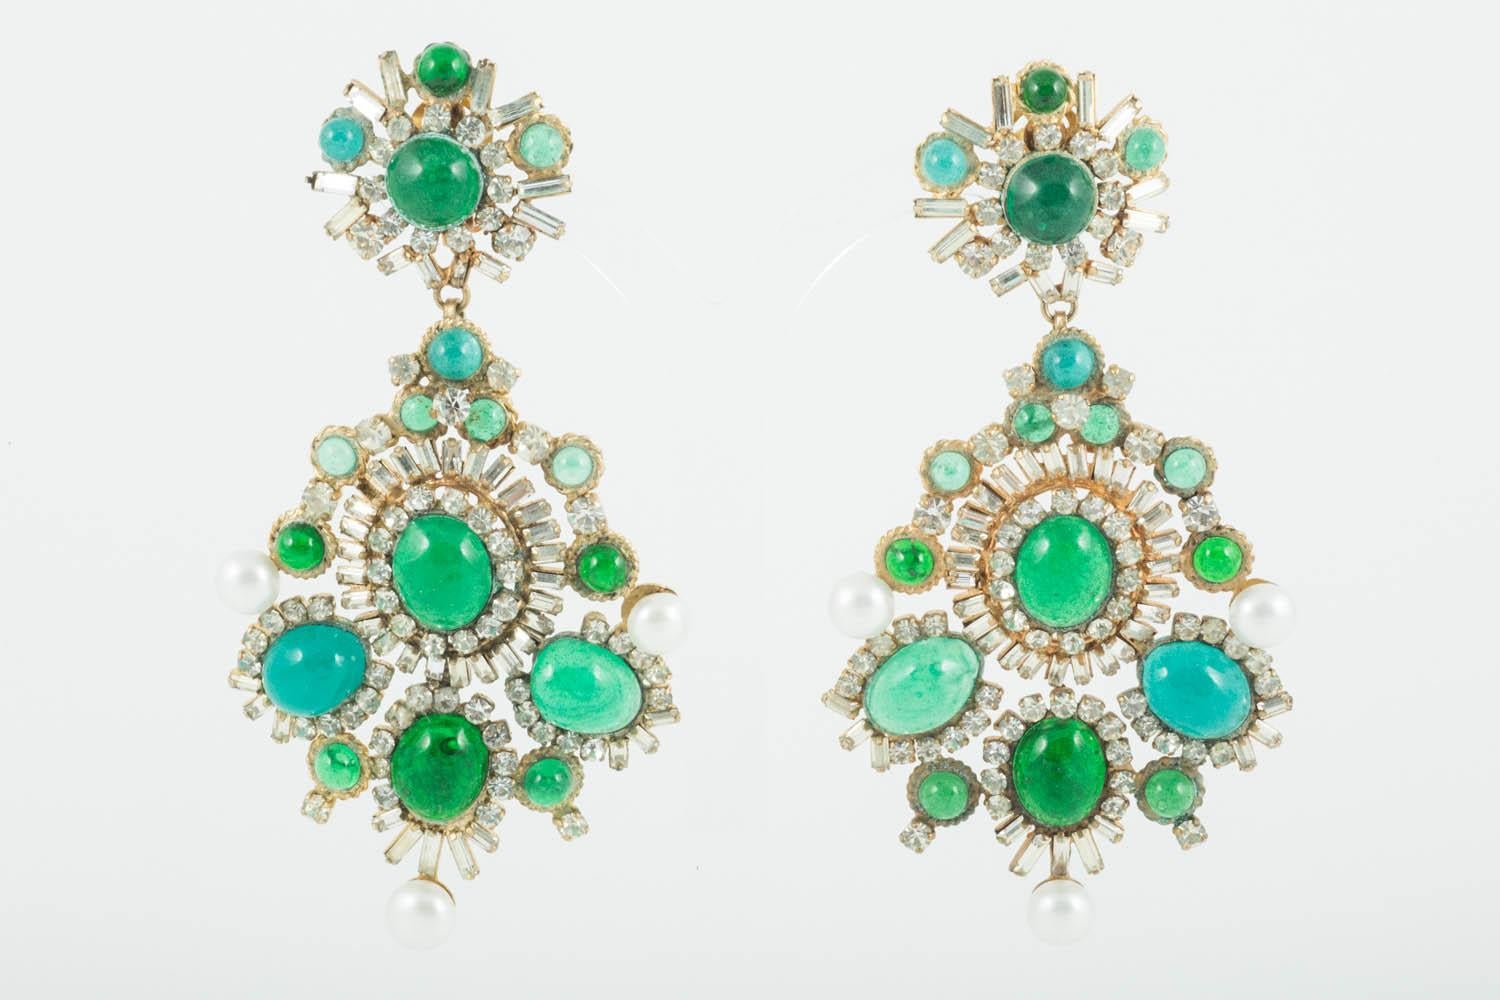 These exquisite poured glass earrings are true statement earrings, truly glamorous and quite unique. Handmade in way made famous by and instantly recognisable as Maison Gripoix, emerald coloured poured glass  and clear pastes are set in a gilded